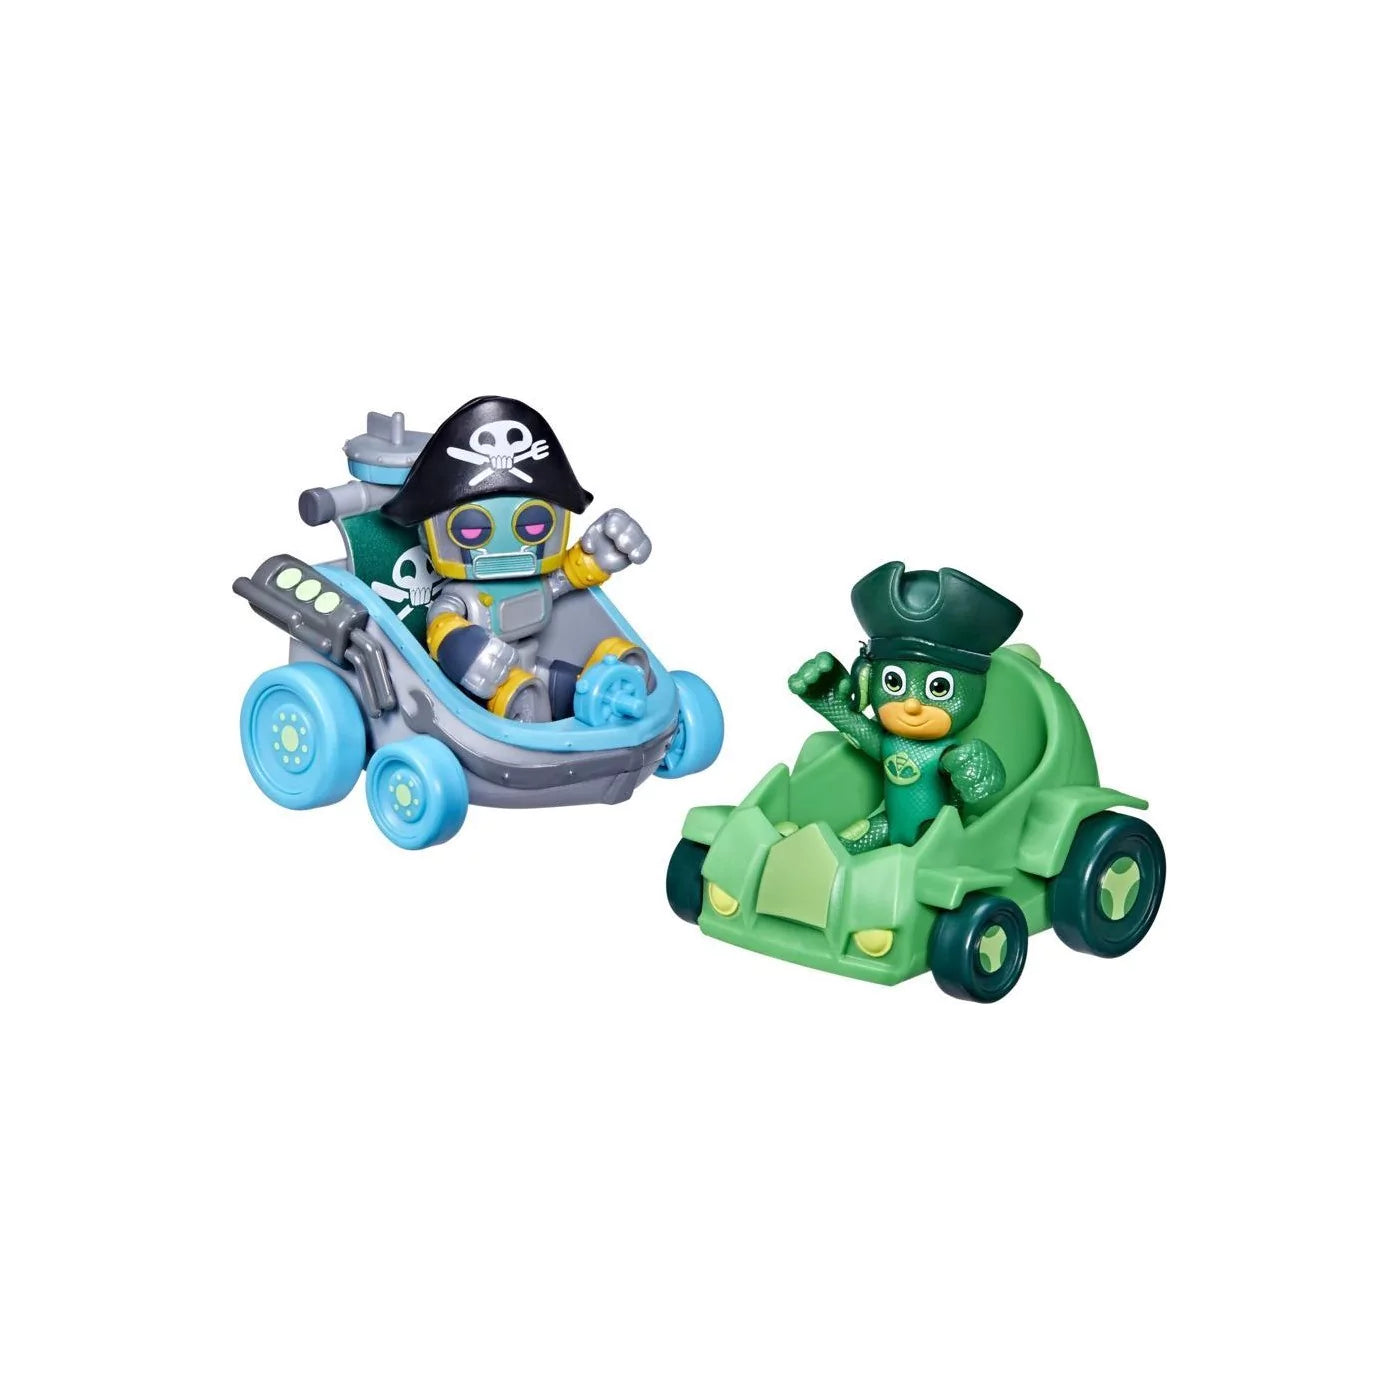 PJ Masks Pirate Power – Gekko & Pirate Robot Battle Racers Preschool Toy, Vehicle and Action Figure Set for Kids Ages 3 and Up - BumbleToys - 5-7 Years, Action Battling, Boys, Catboy, Funday, Pirate Power, Pj Masks